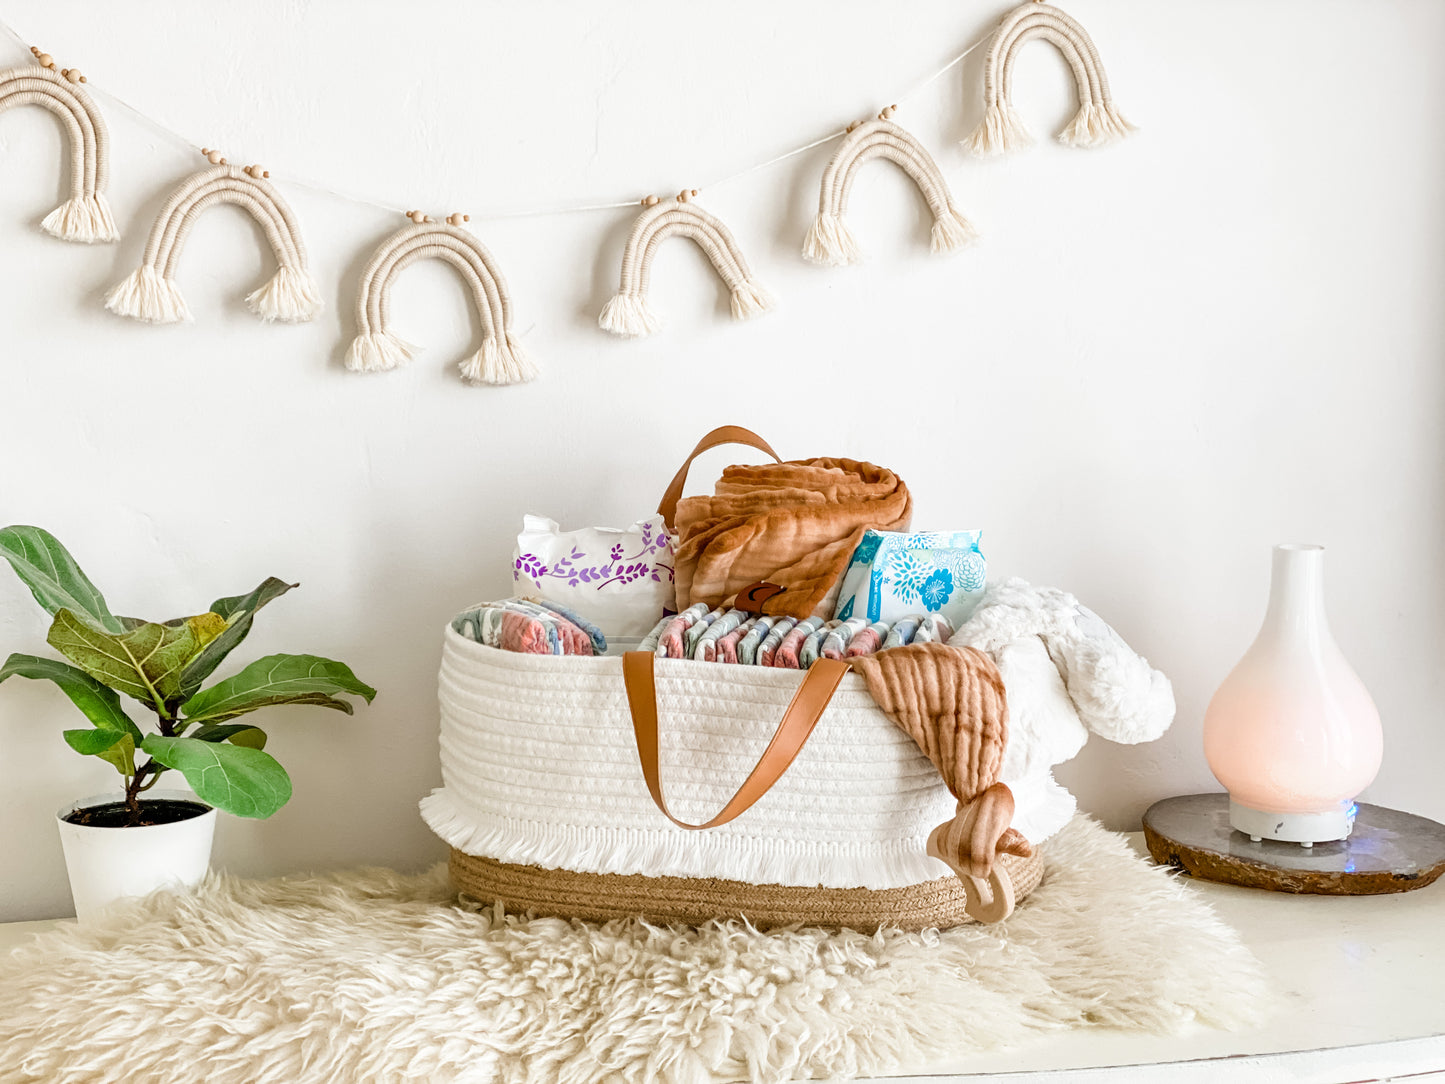 Coastfully Yours Large Cotton Rope and Jute Diaper Caddy -Nursery Storage Baby Changing Basket with removable dividers